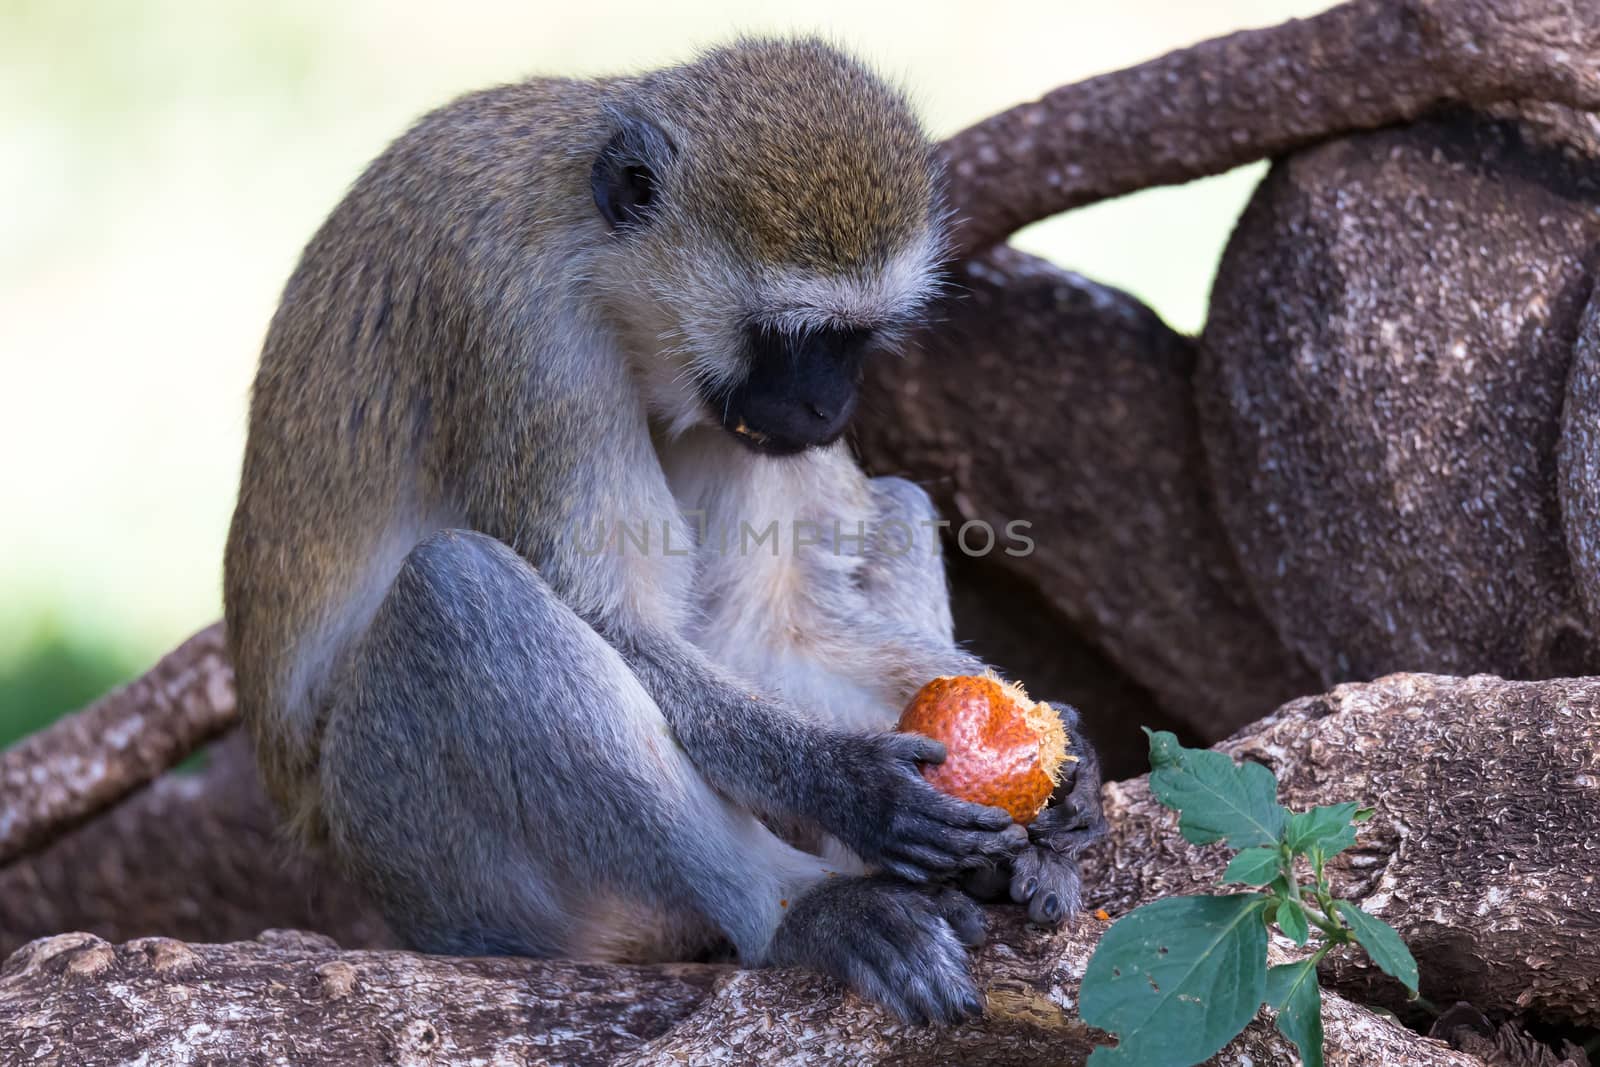 A monkey is doing a fruit meal in the grass